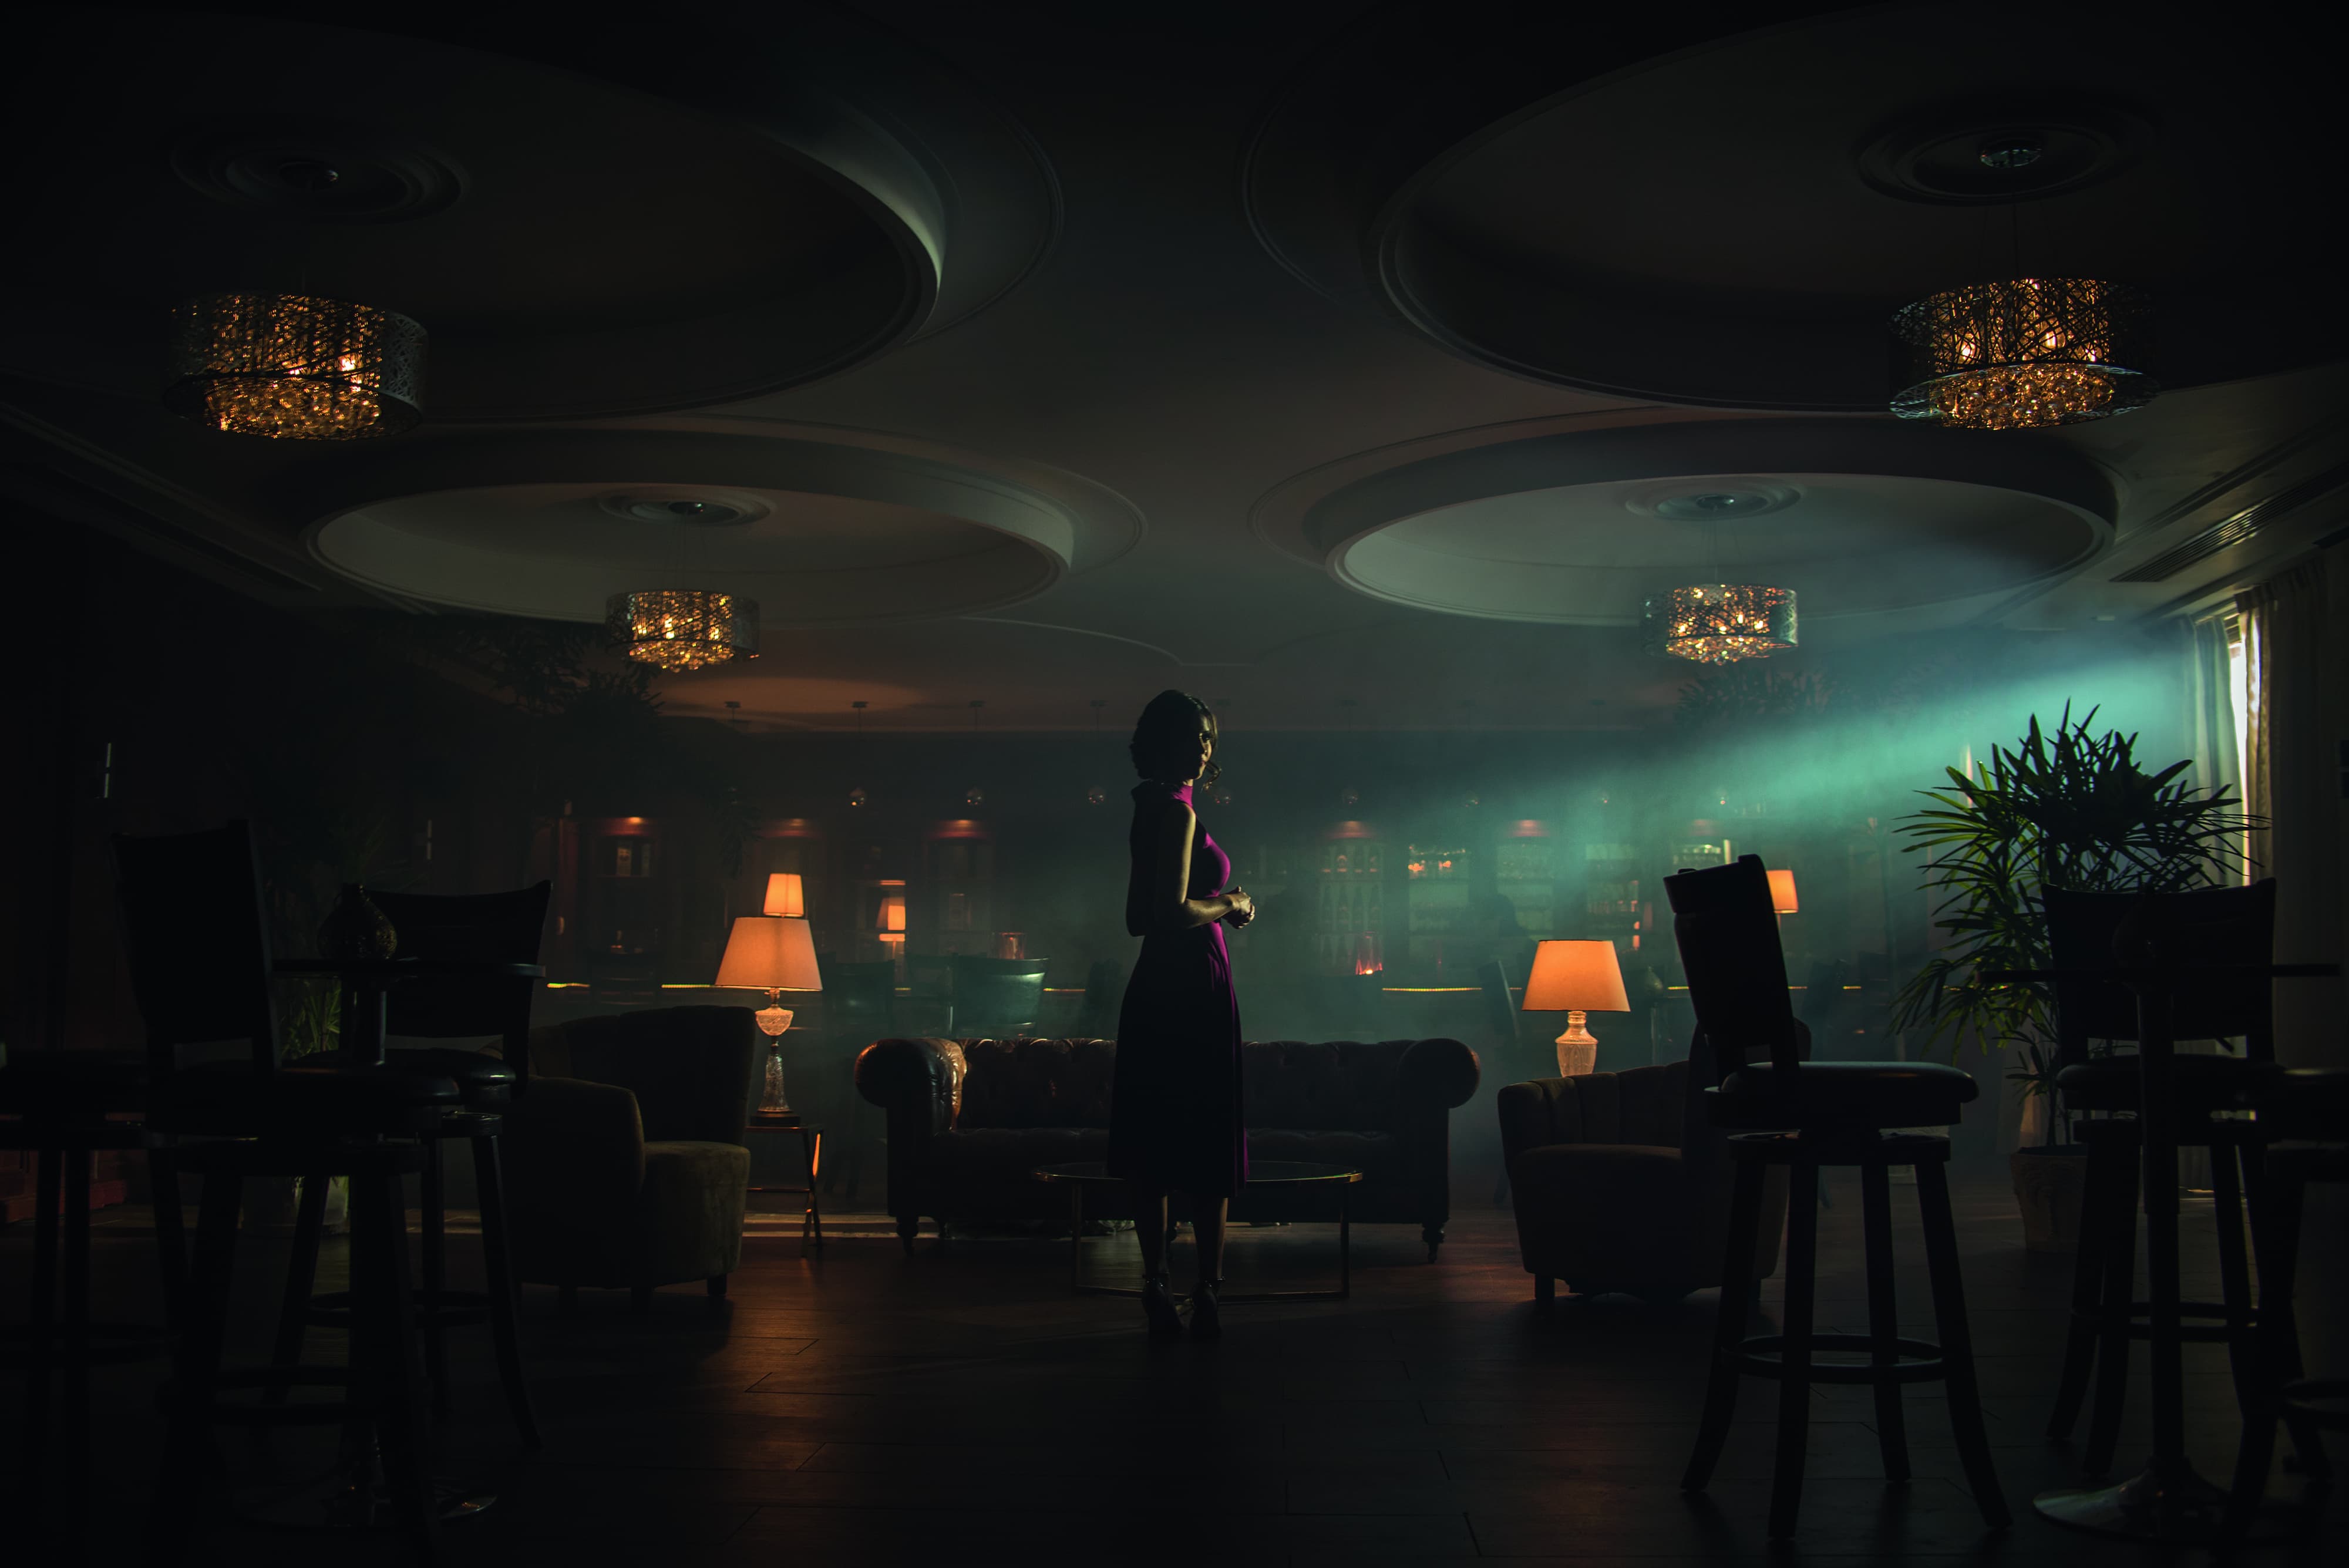 A woman stands in a grand. dimly lit empty bar